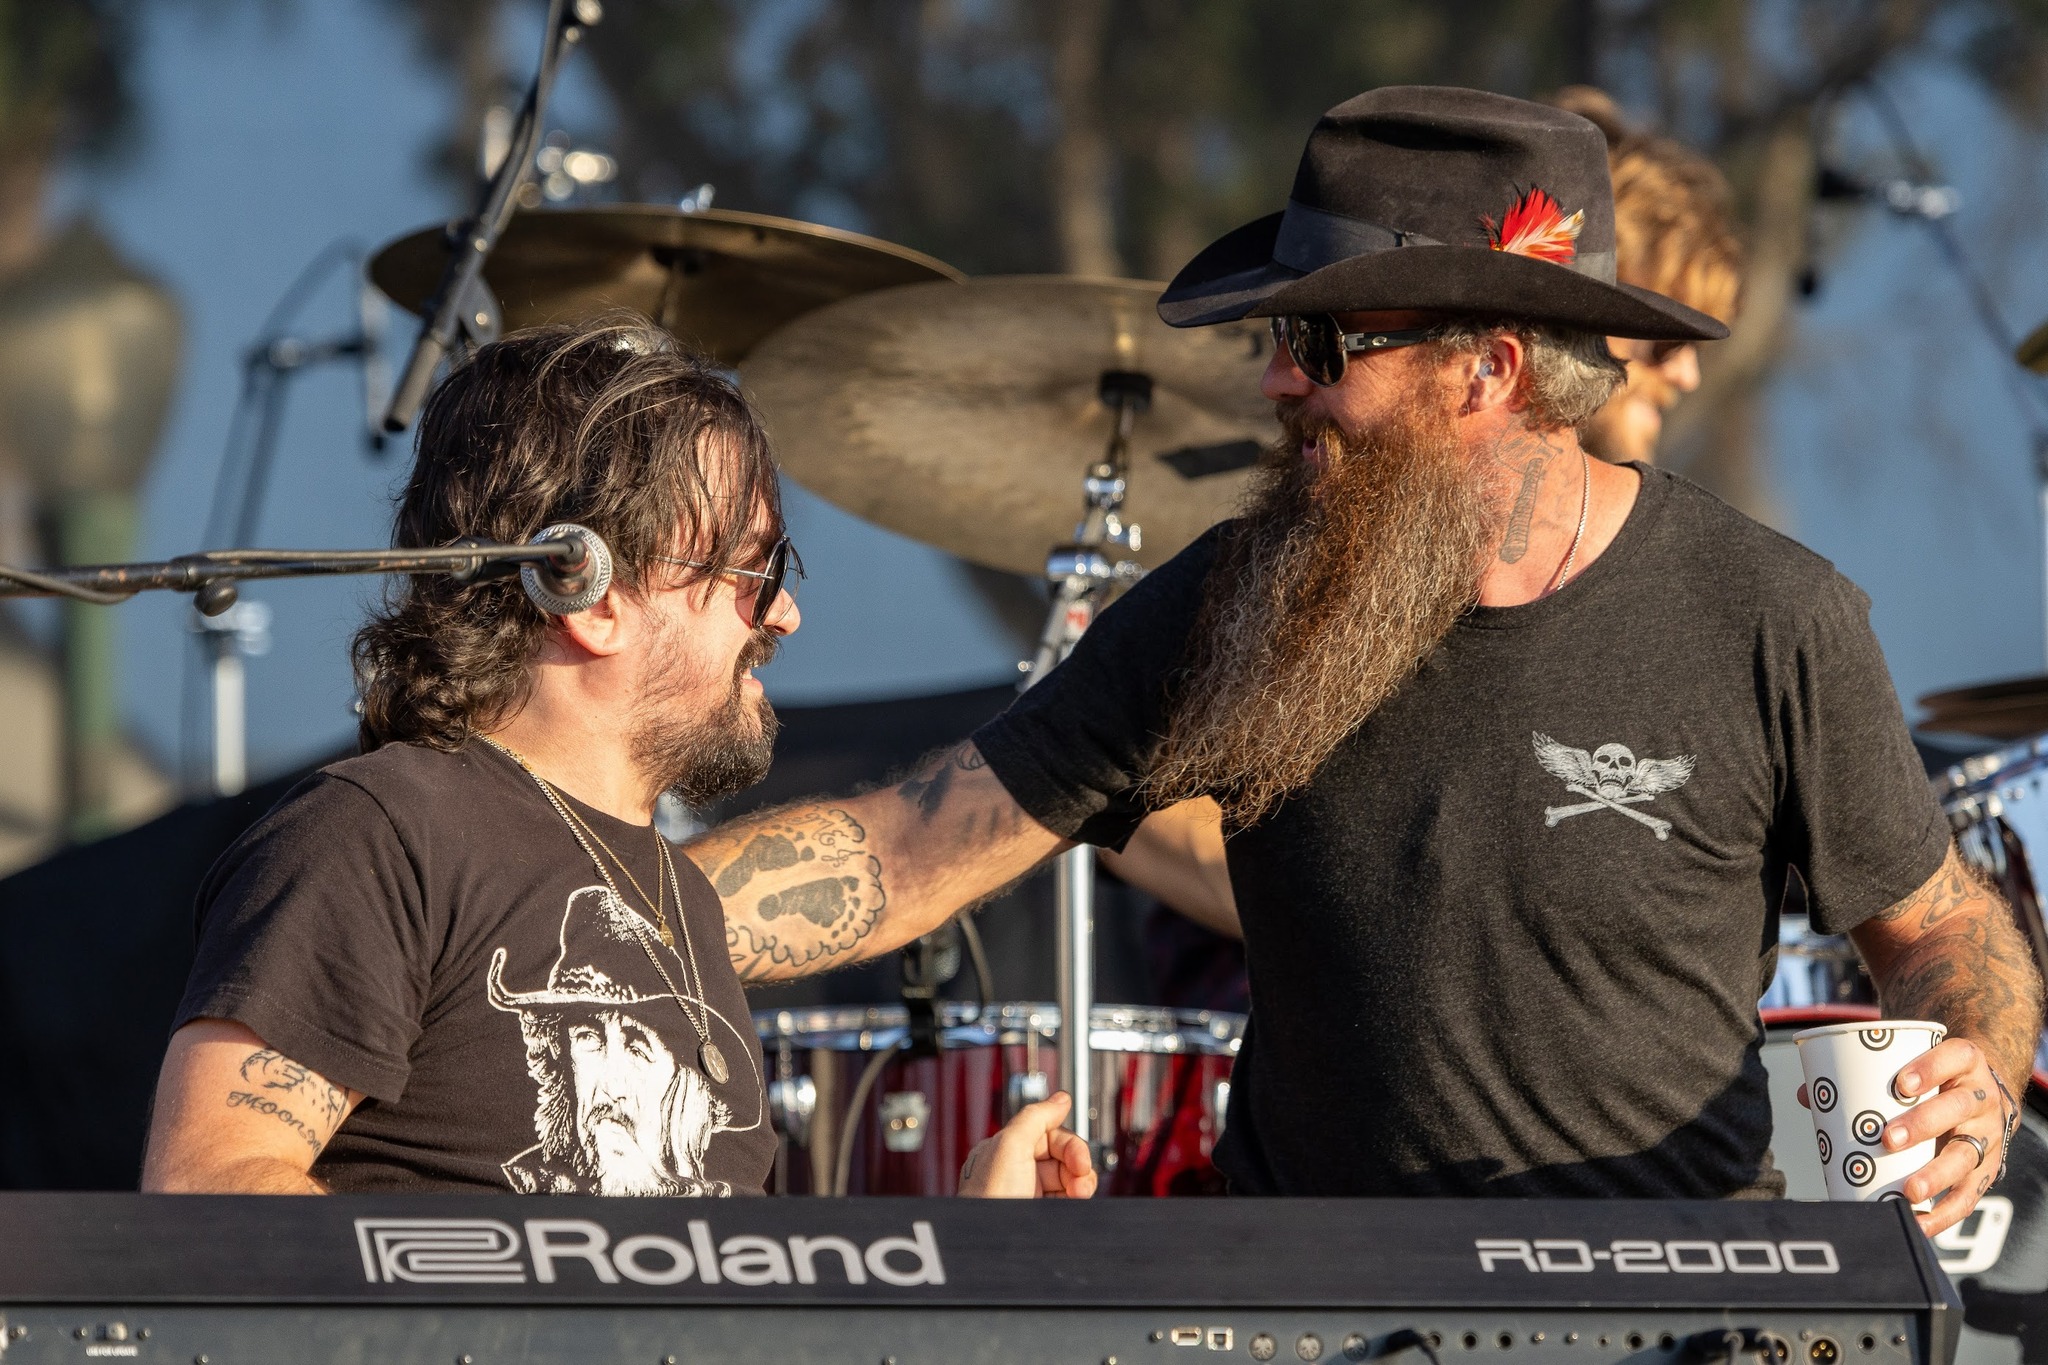 Shooter Jennings and Cody Jinks